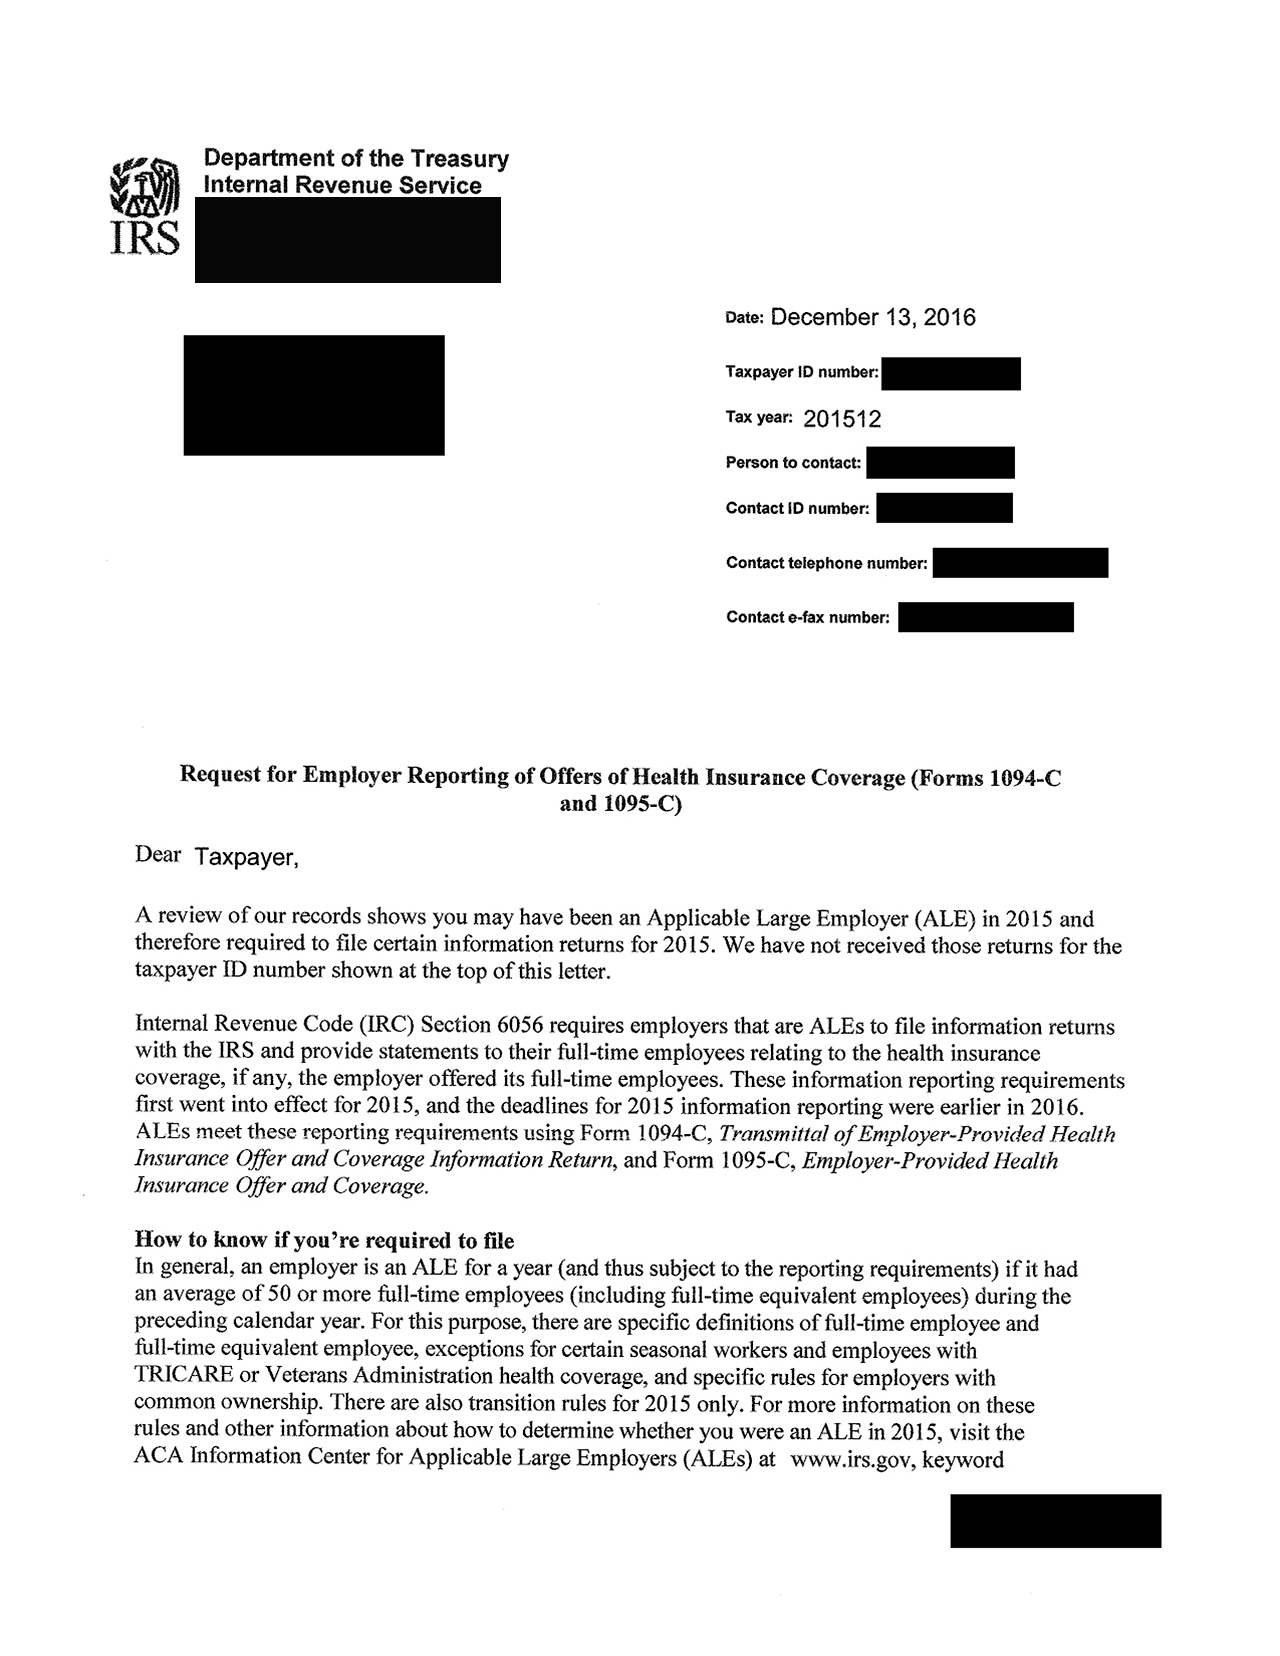 IRS-LETTER_redacted_1IRS-LETTER_redacted_1